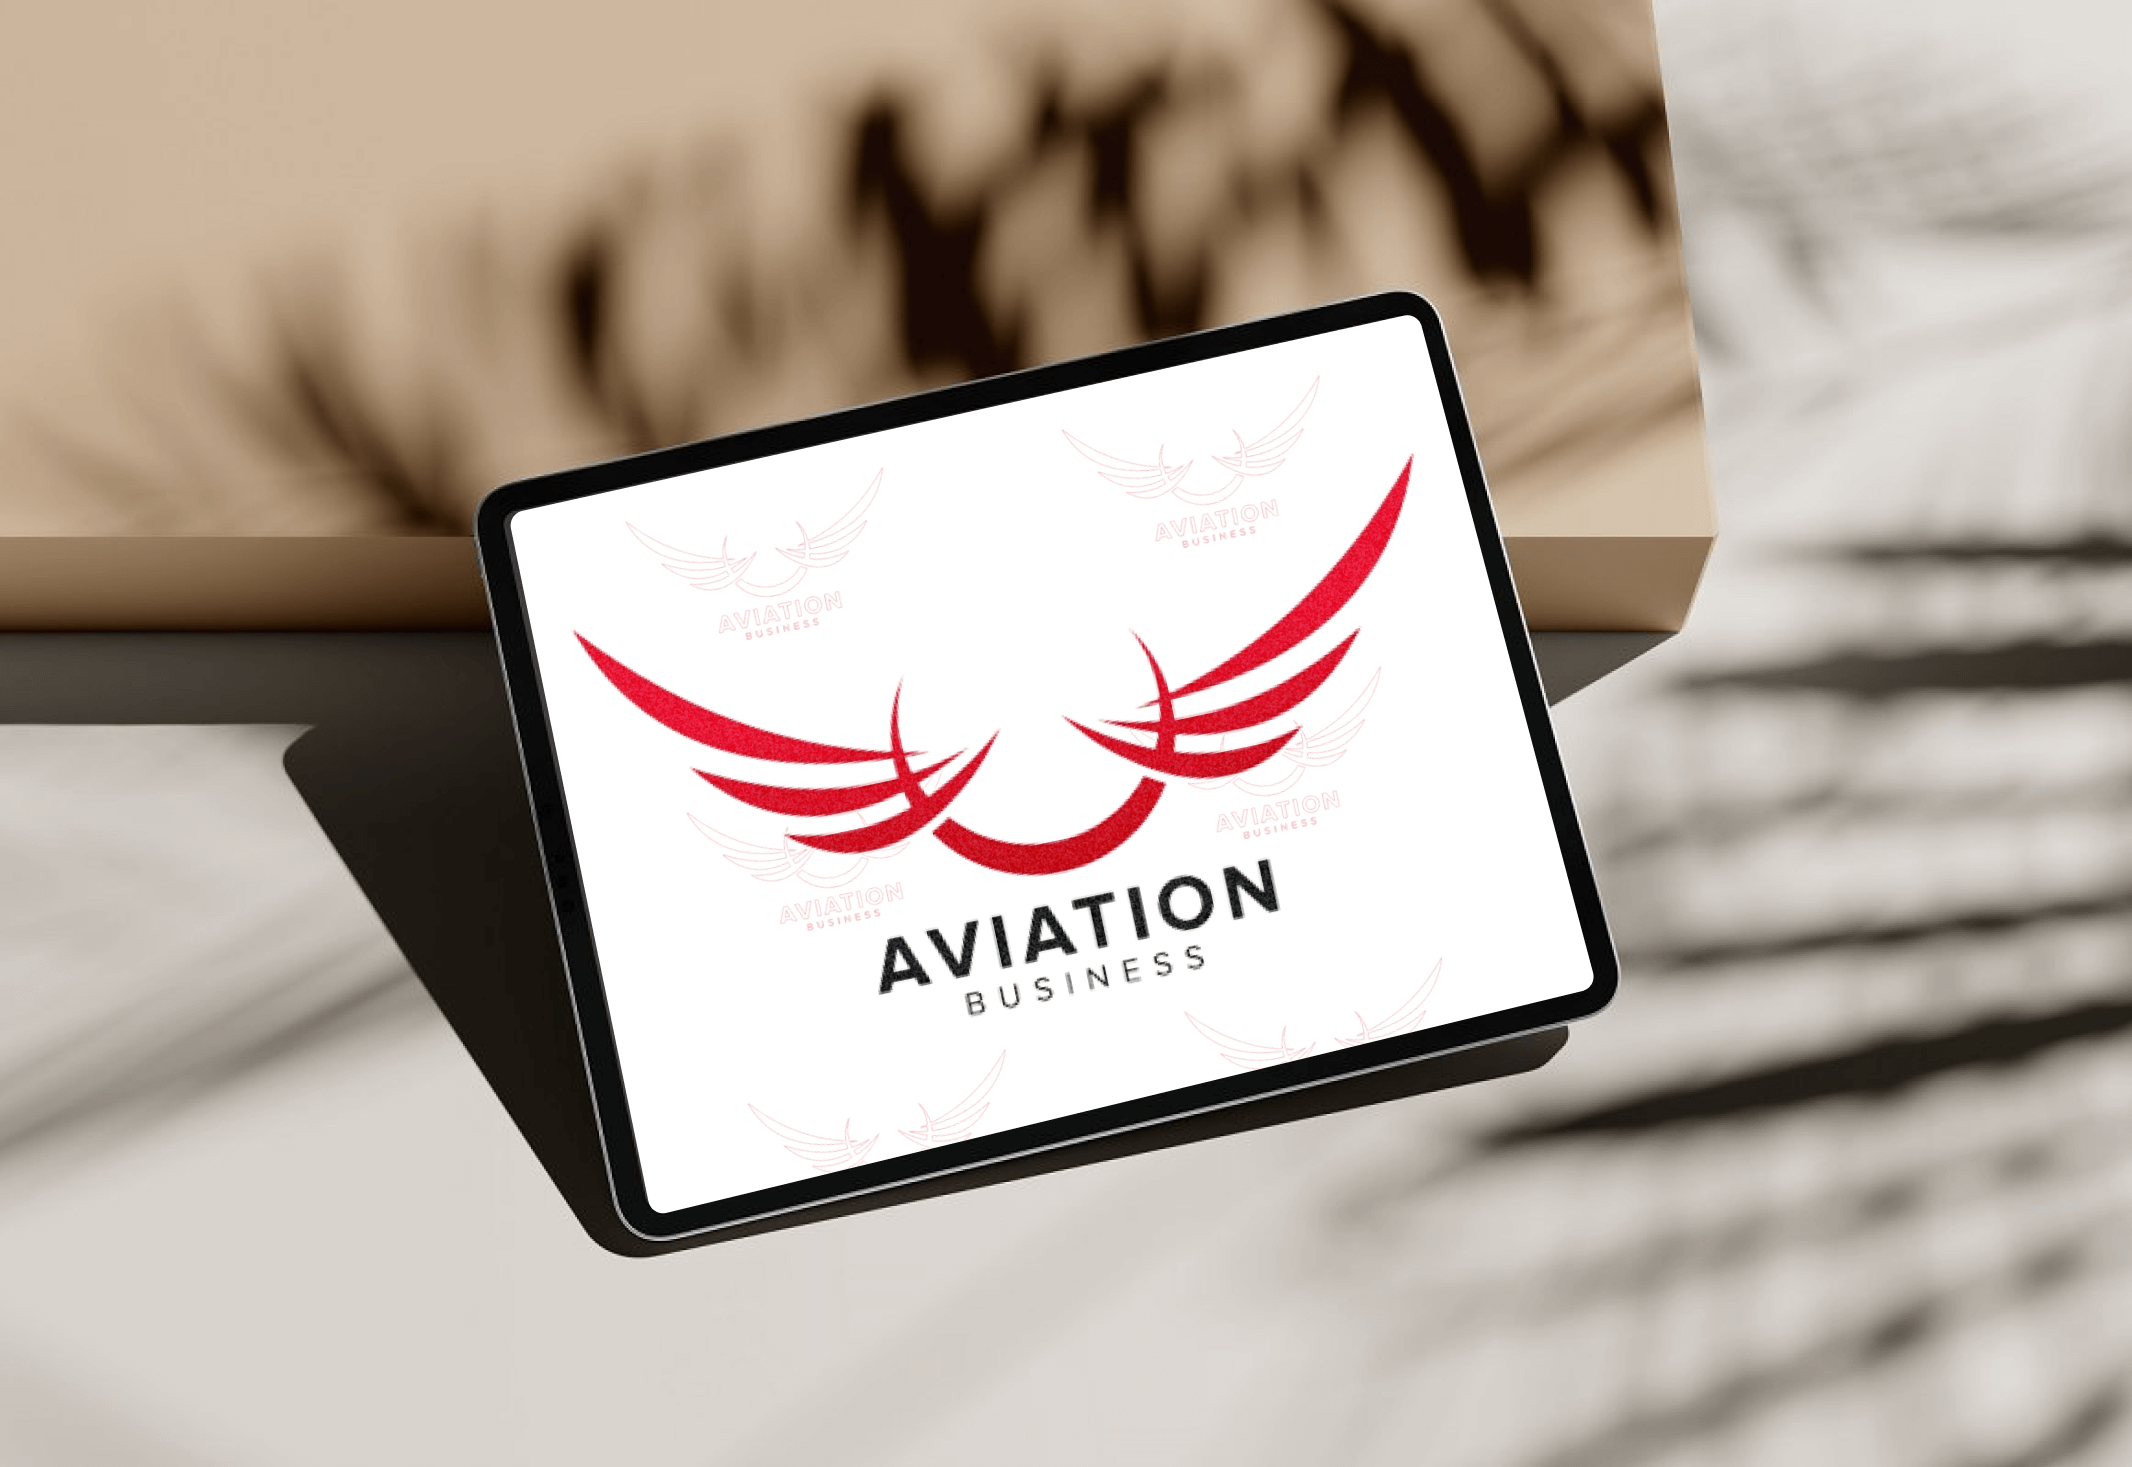 Wing airlines concept design on tablet.